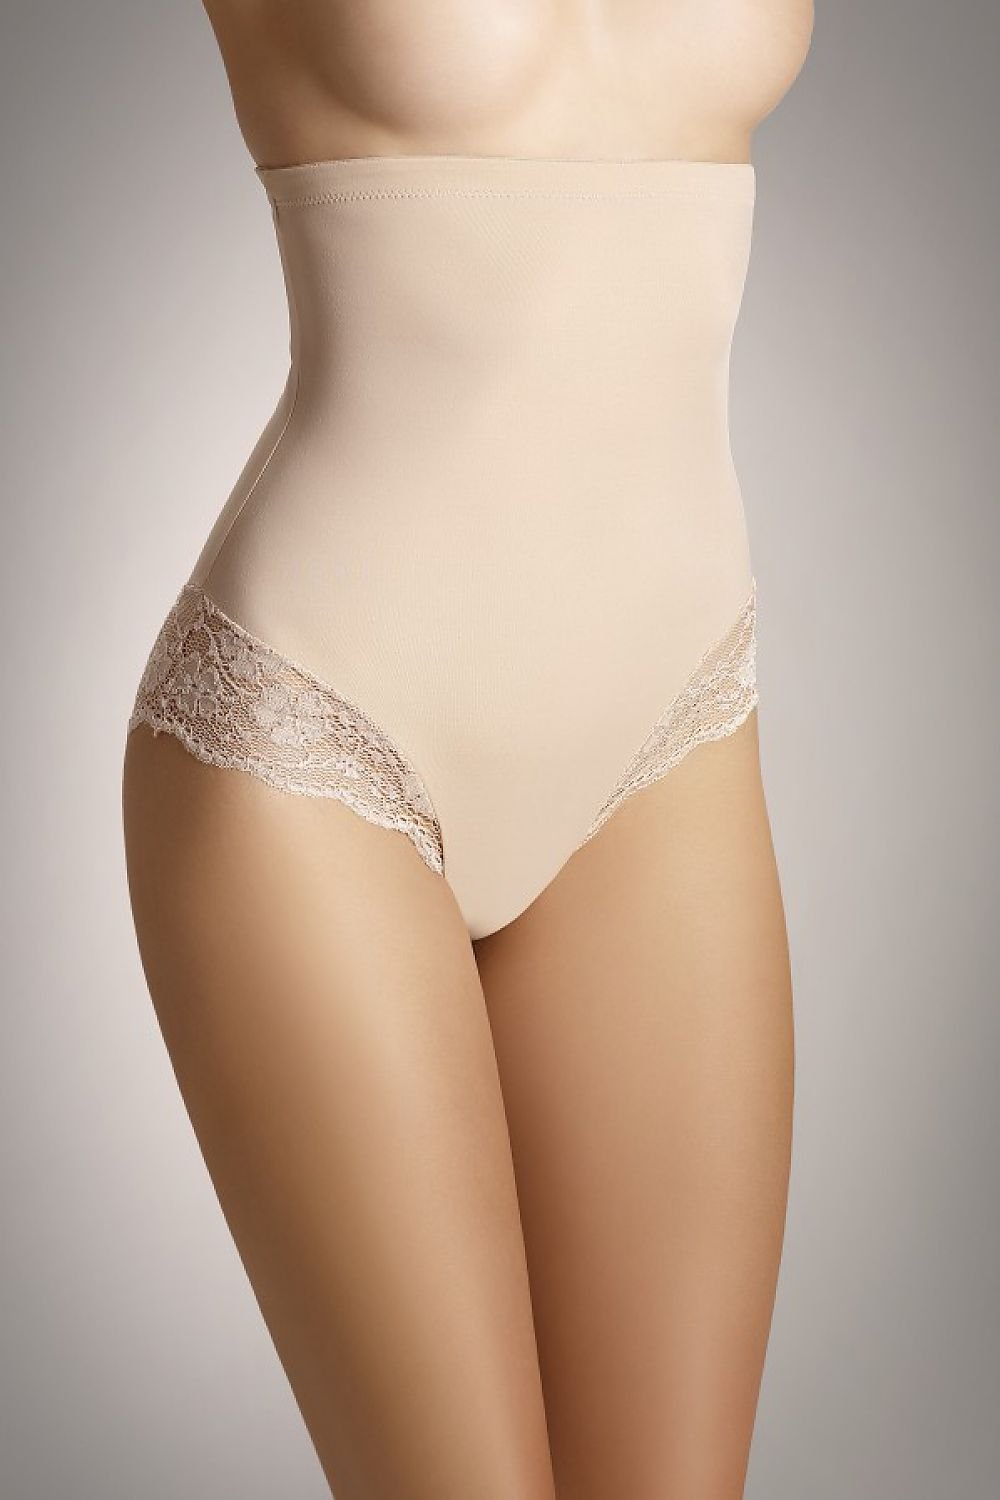 Wholesale Girls Panty Line Cotton, Lace, Seamless, Shaping